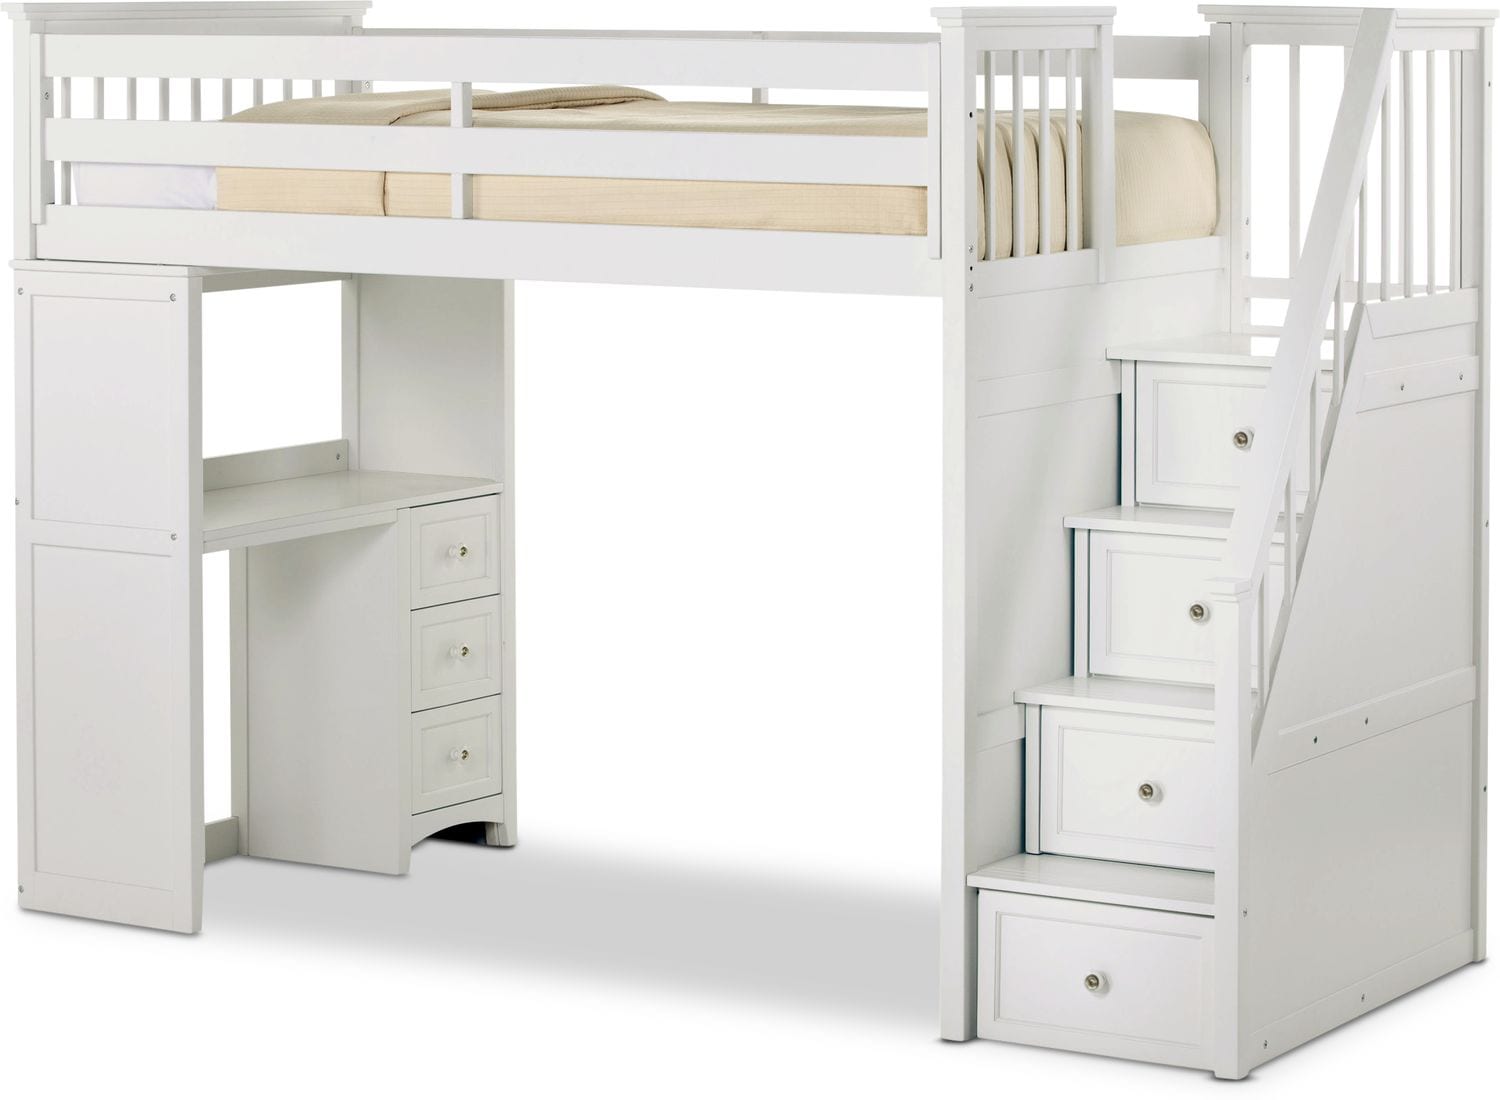 Flynn Loft Bed With Storage Stairs And Desk American Signature